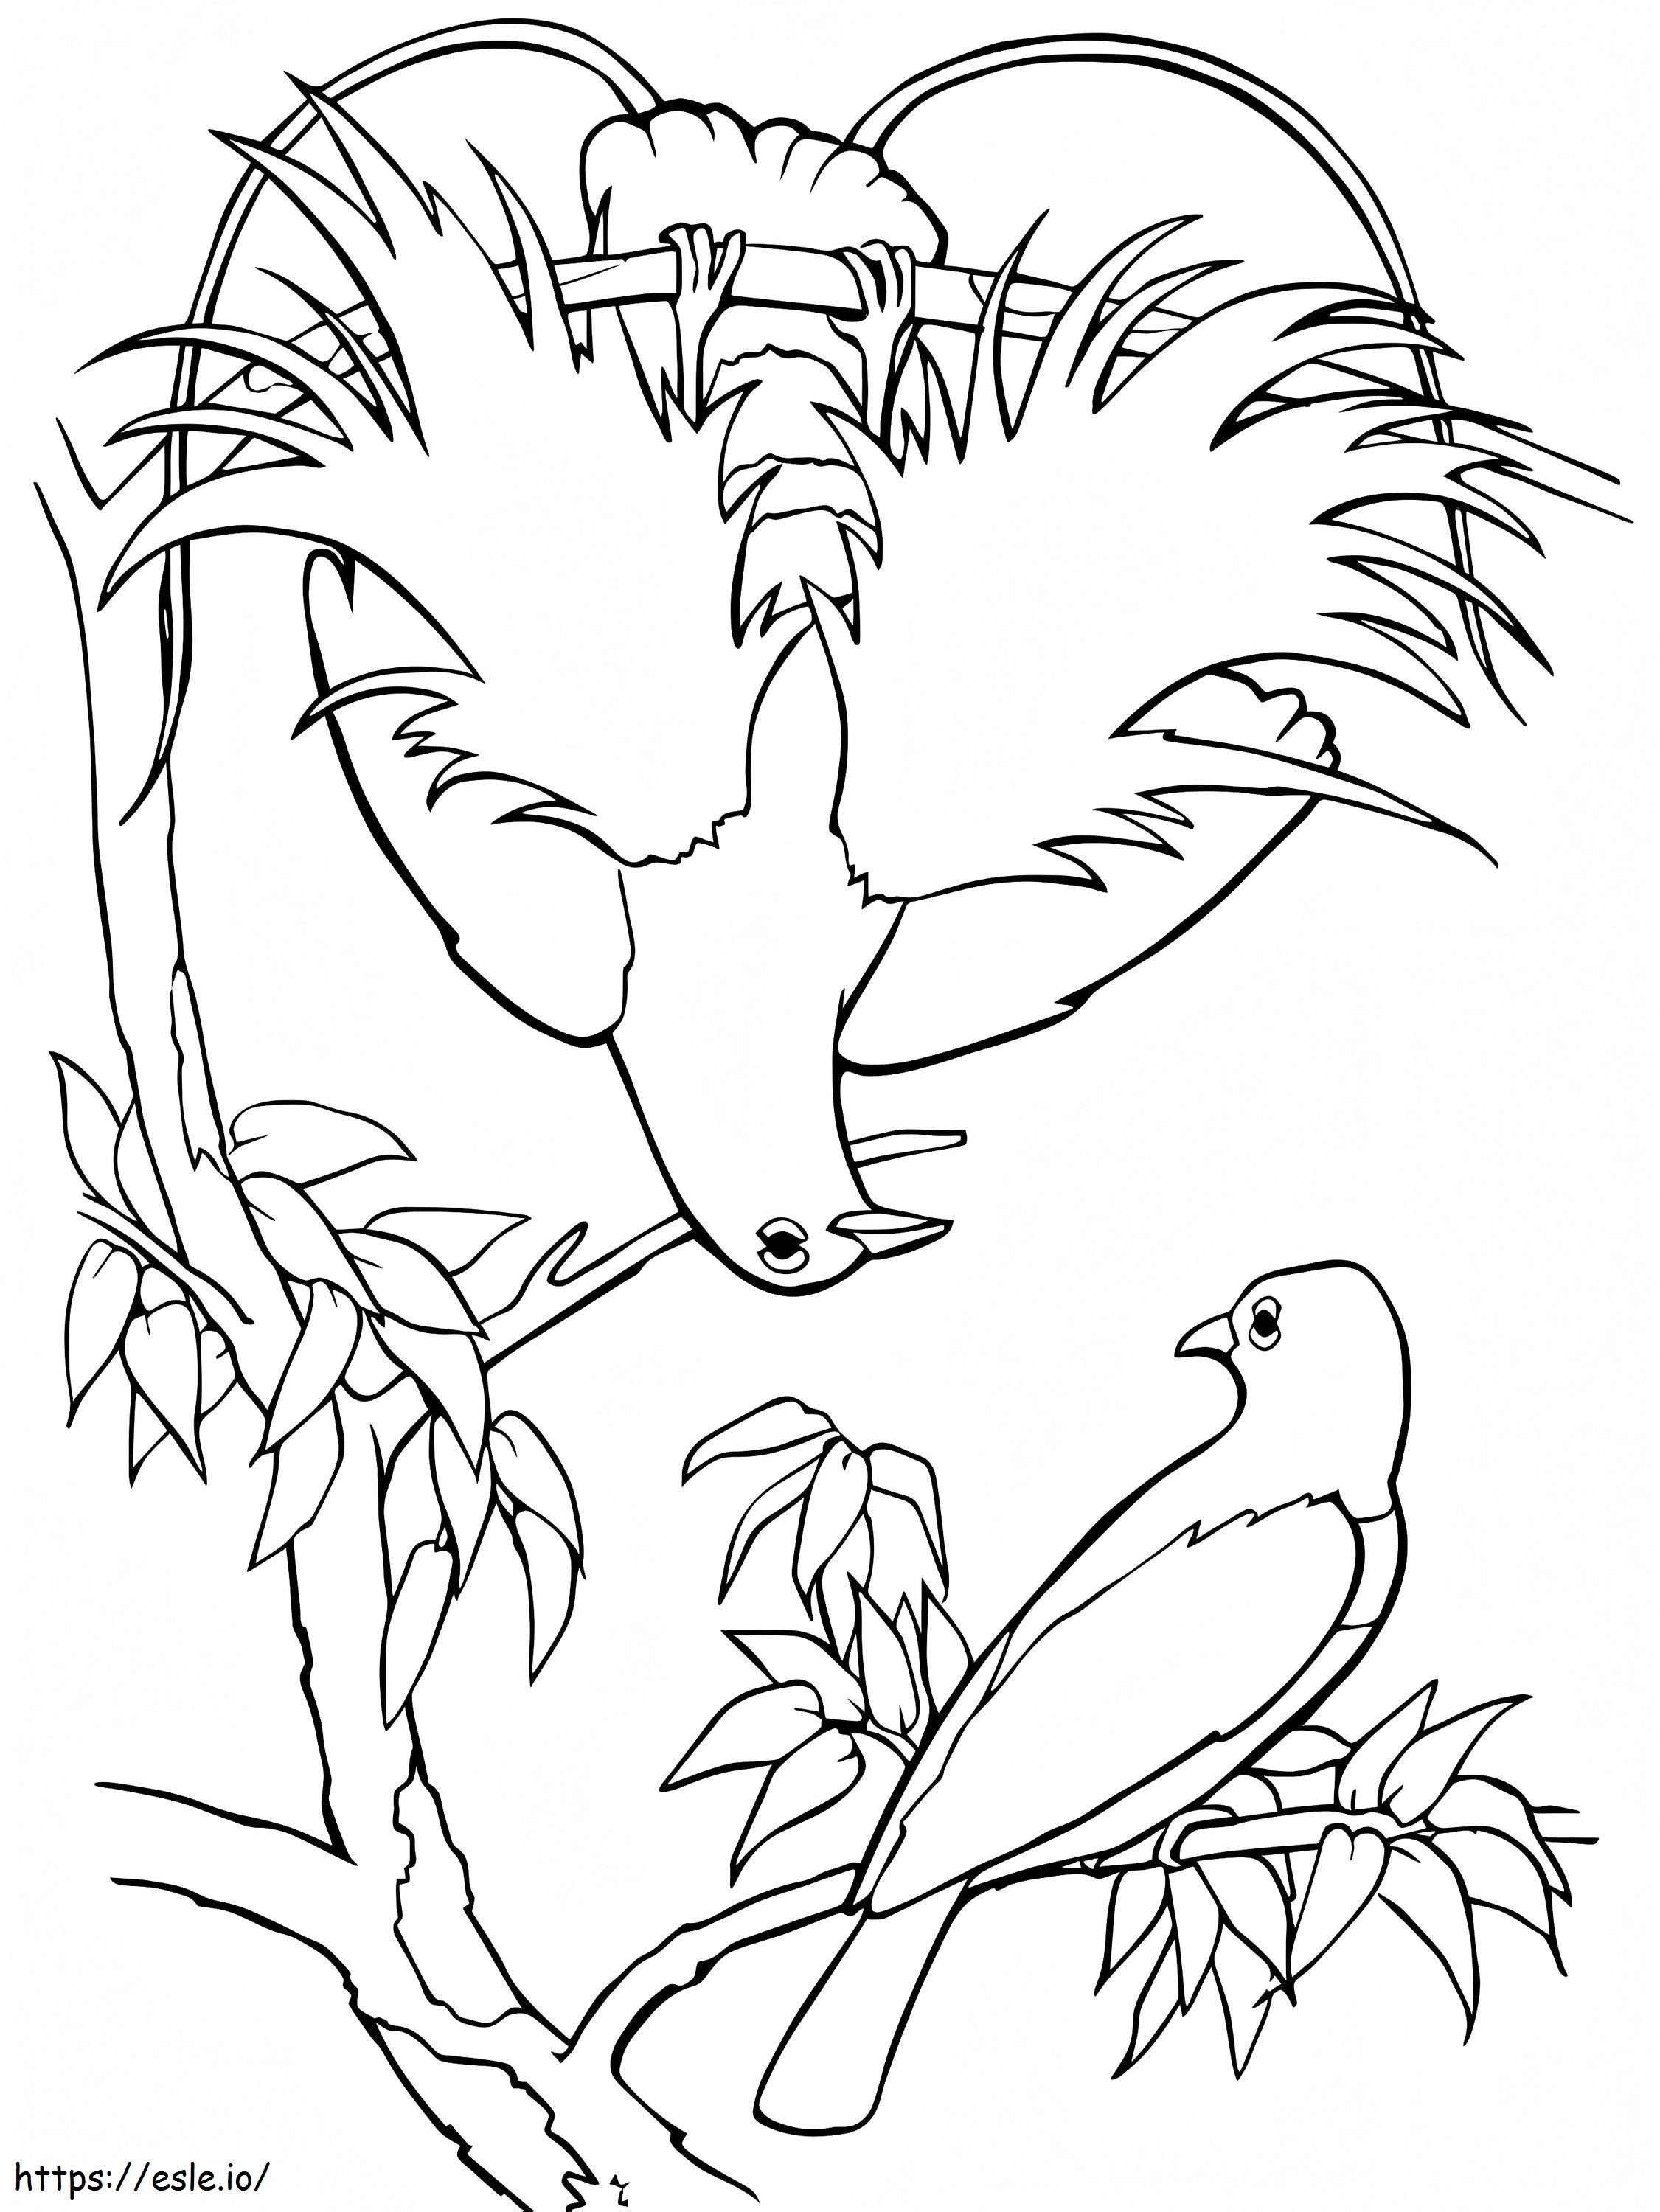 Blue Bird Of Paradise coloring page